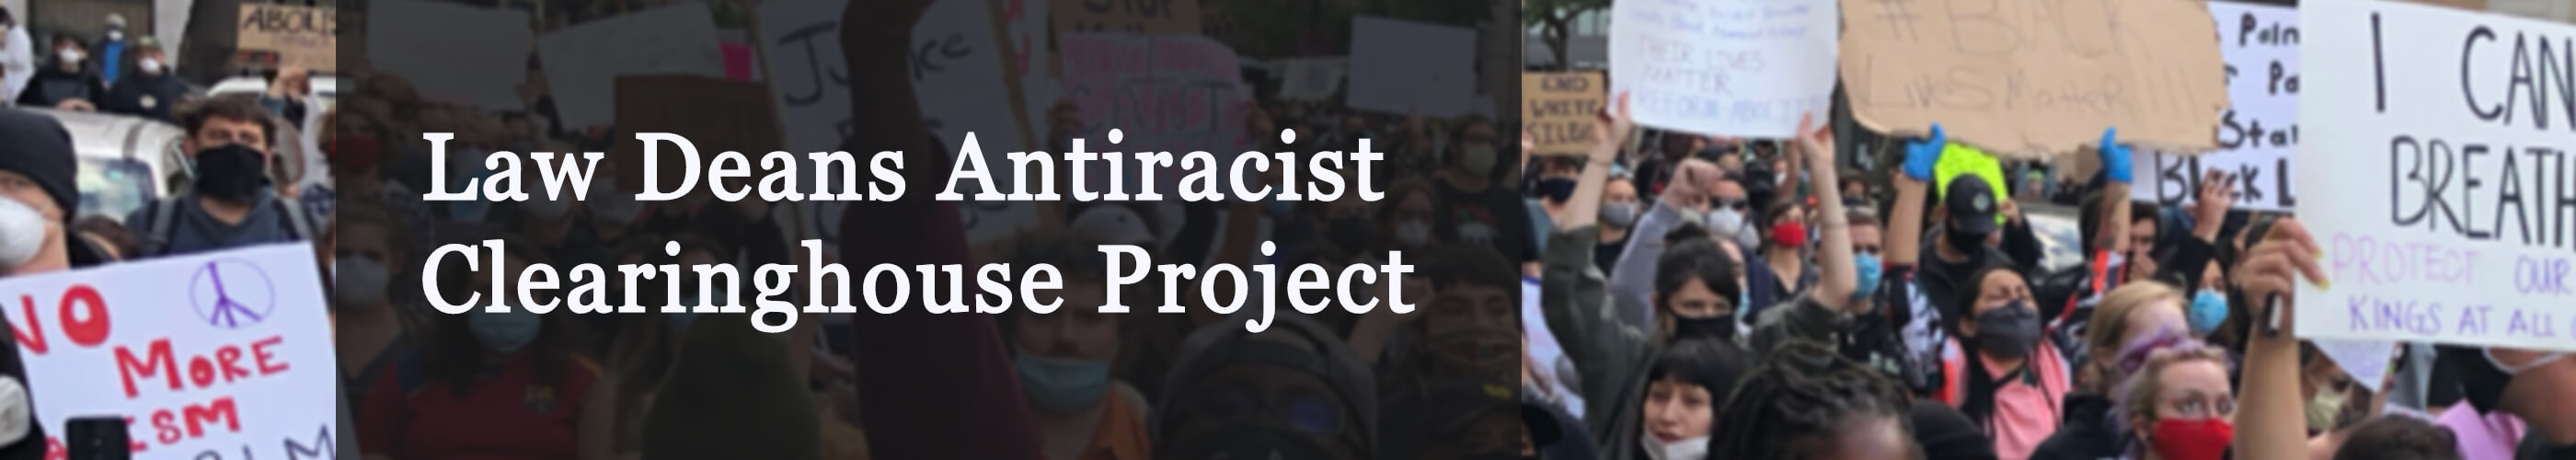 law deans antiracist clearinghouse project